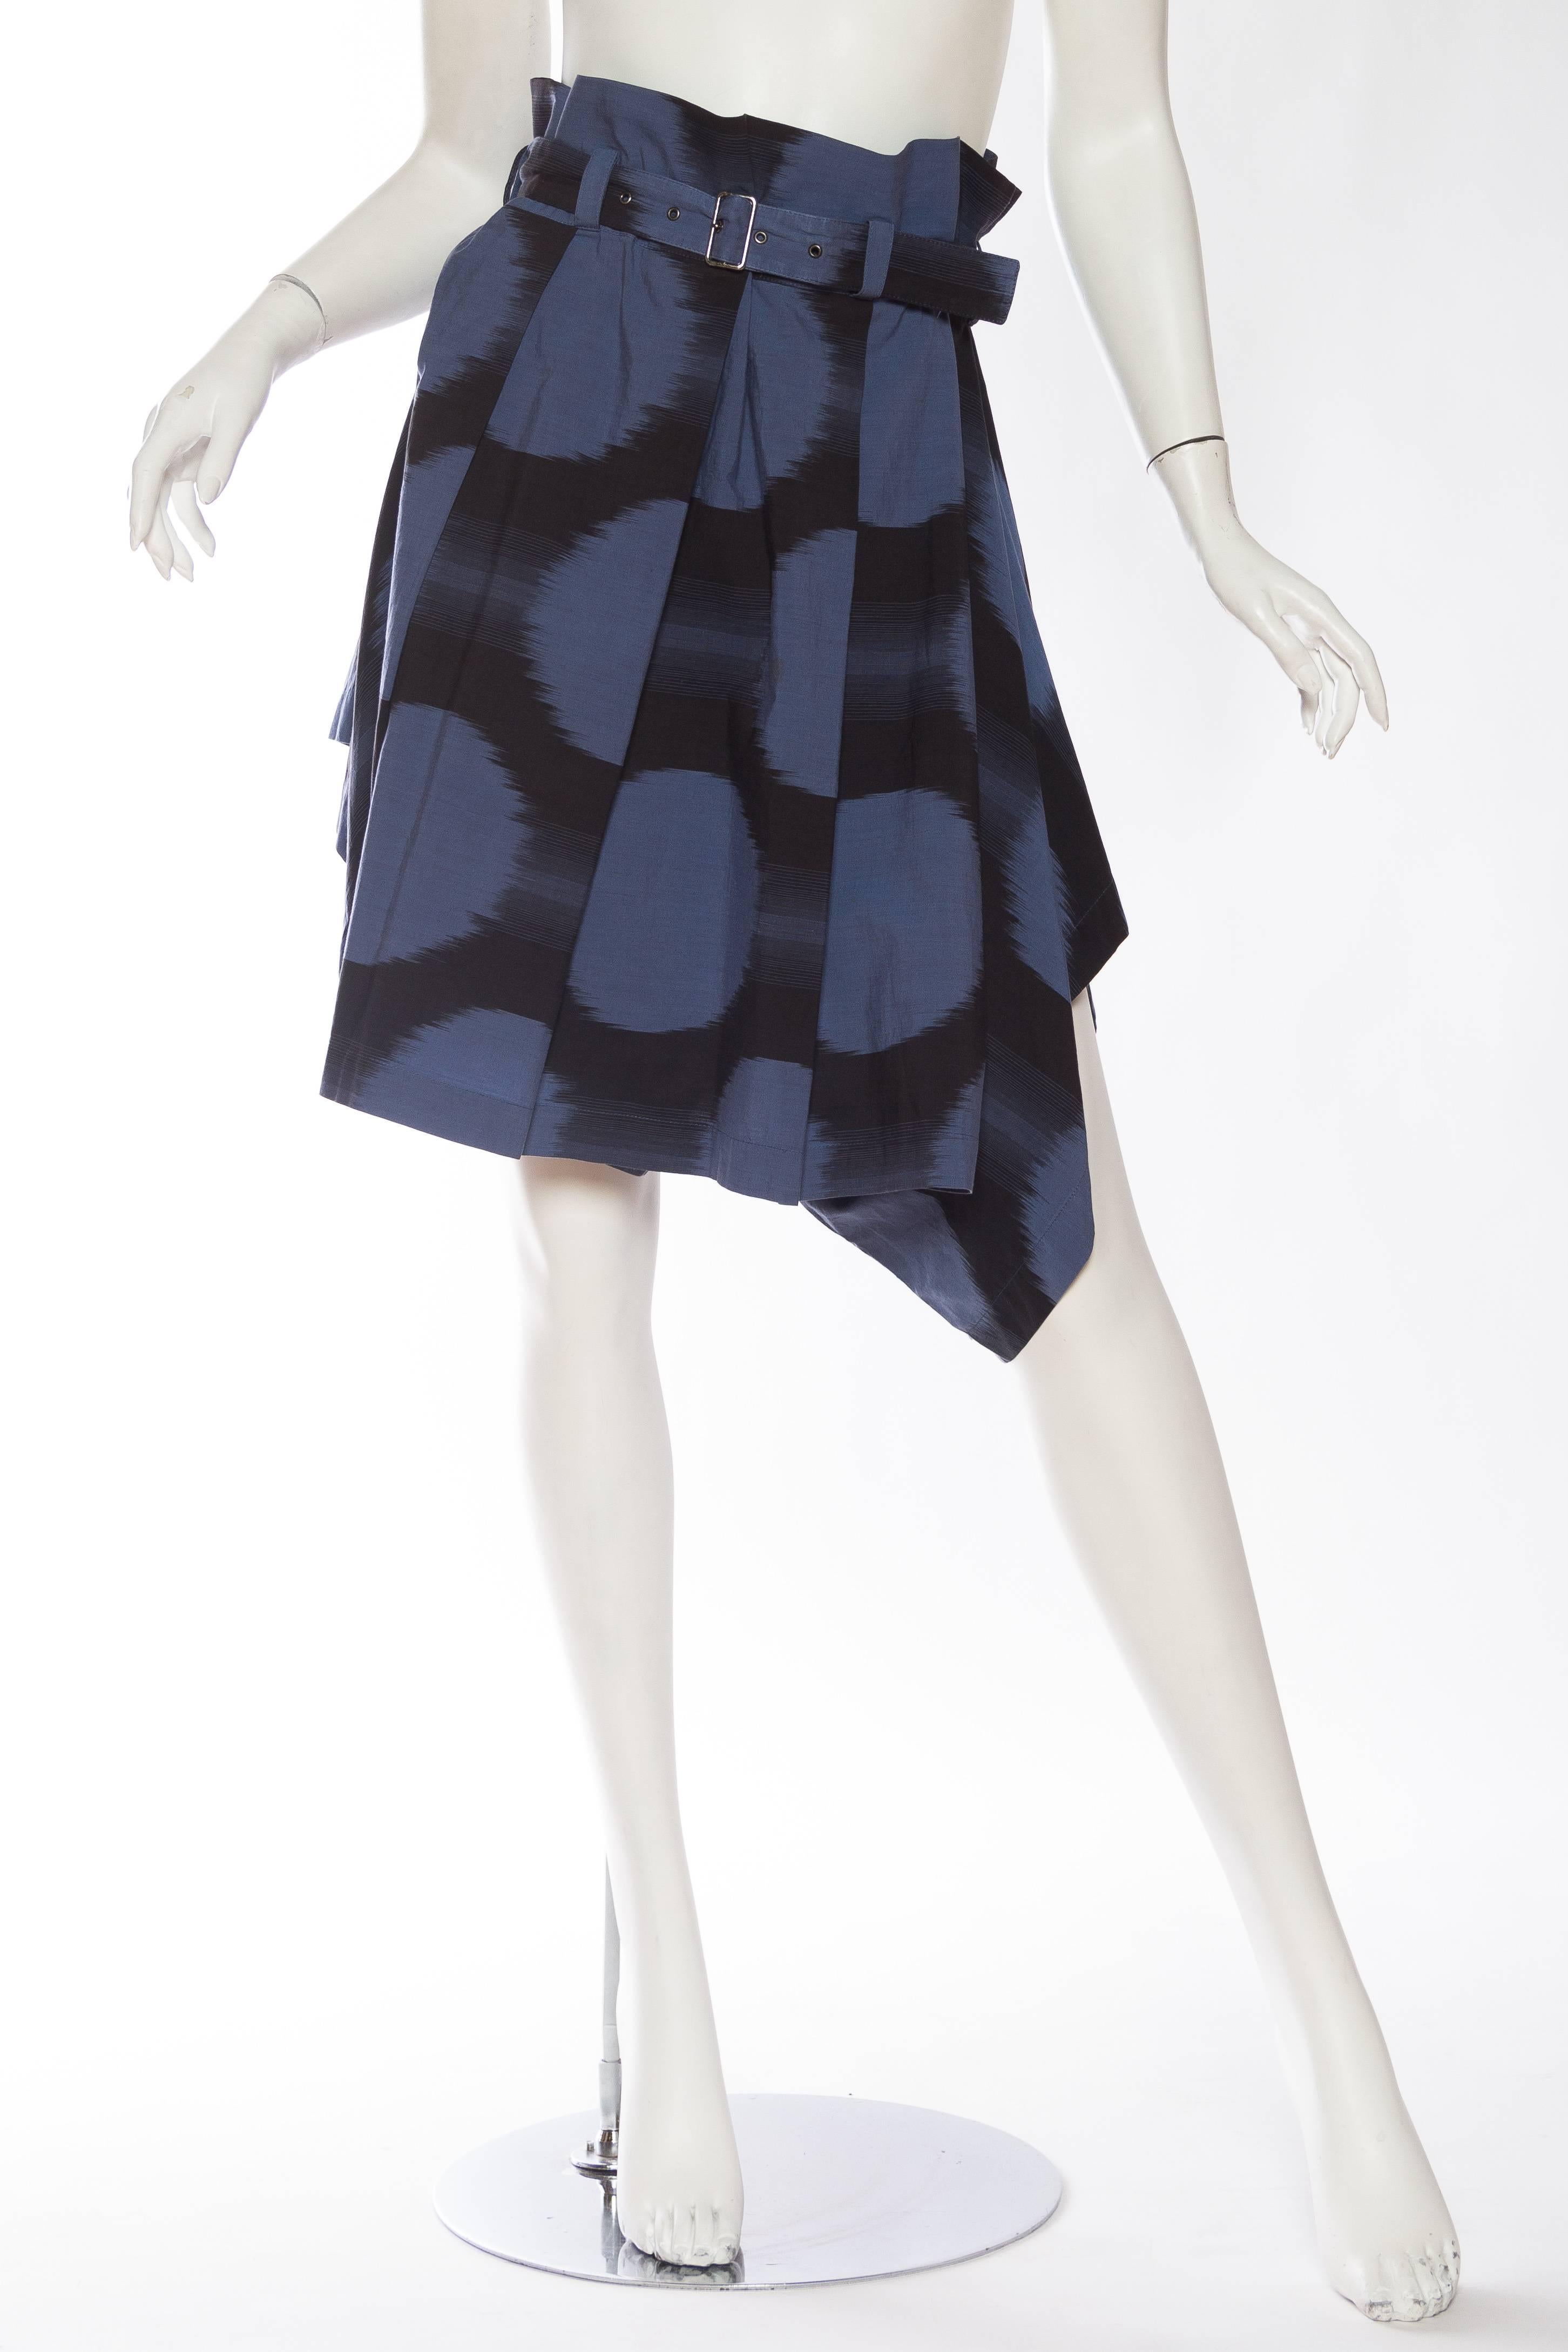 This piece can be worn both as a skirt and as shorts. Also looks cool over a heavy sweater belted high. Beautiful Ikat cotton. Bergdorf Goodman label